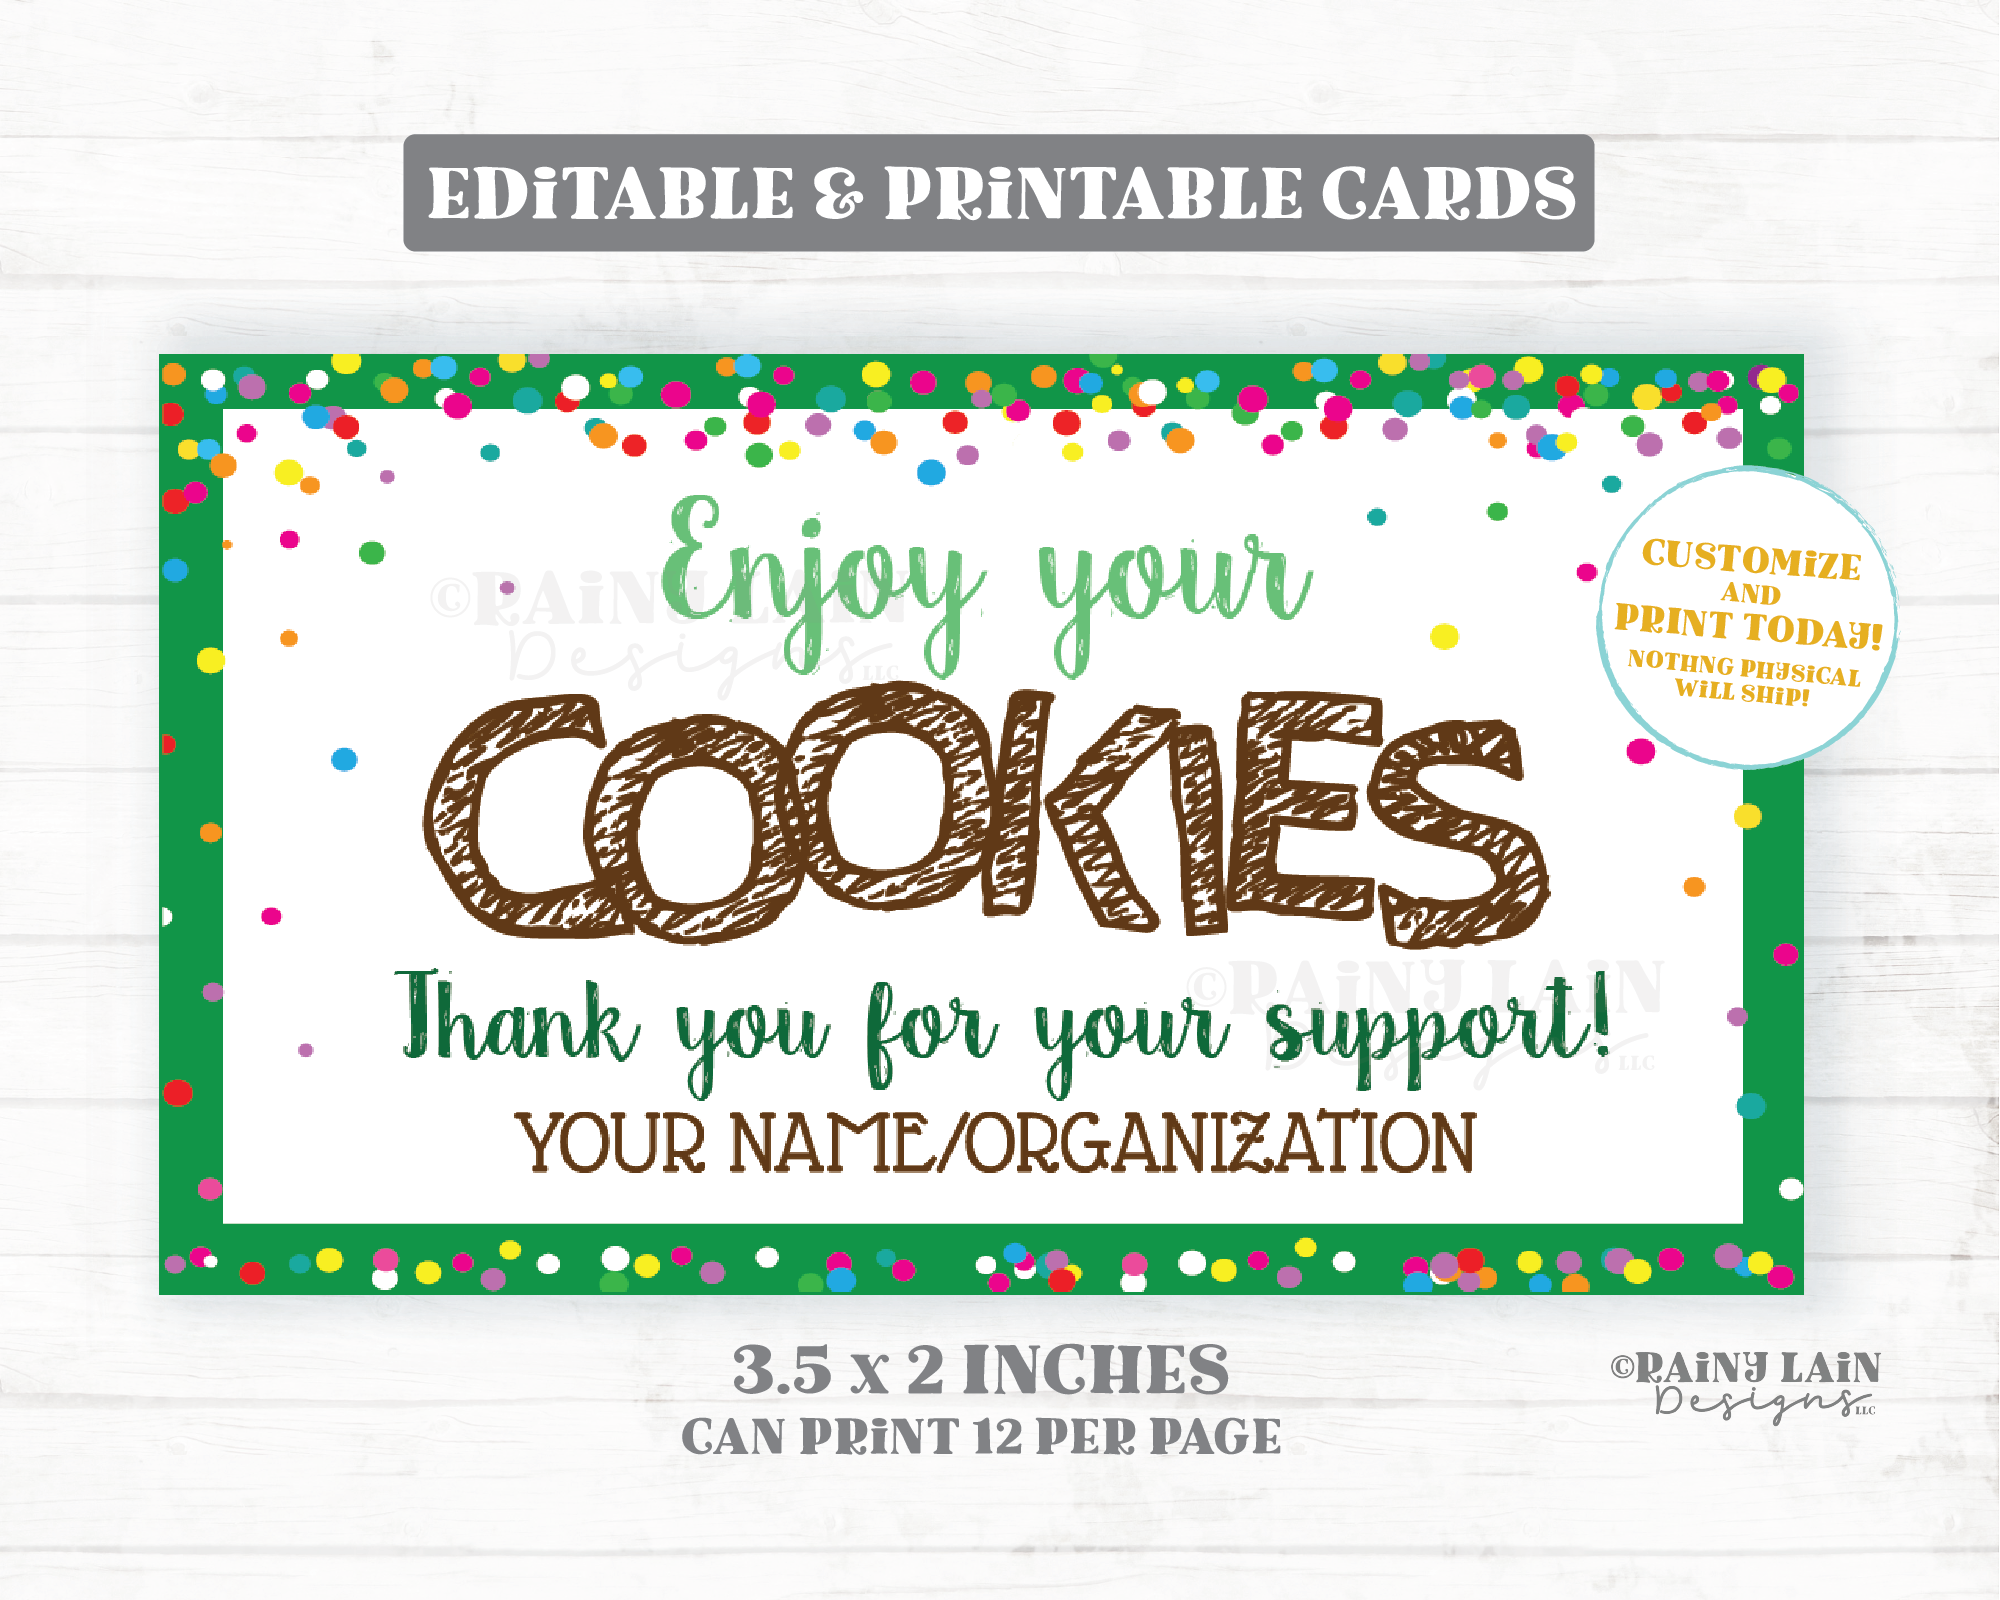 Cookie Thank You Note Editable Cookies Thank You Card Business Card Size Booth Printable Sales Bake Sale Bakery Cookie Tag Cookie Card